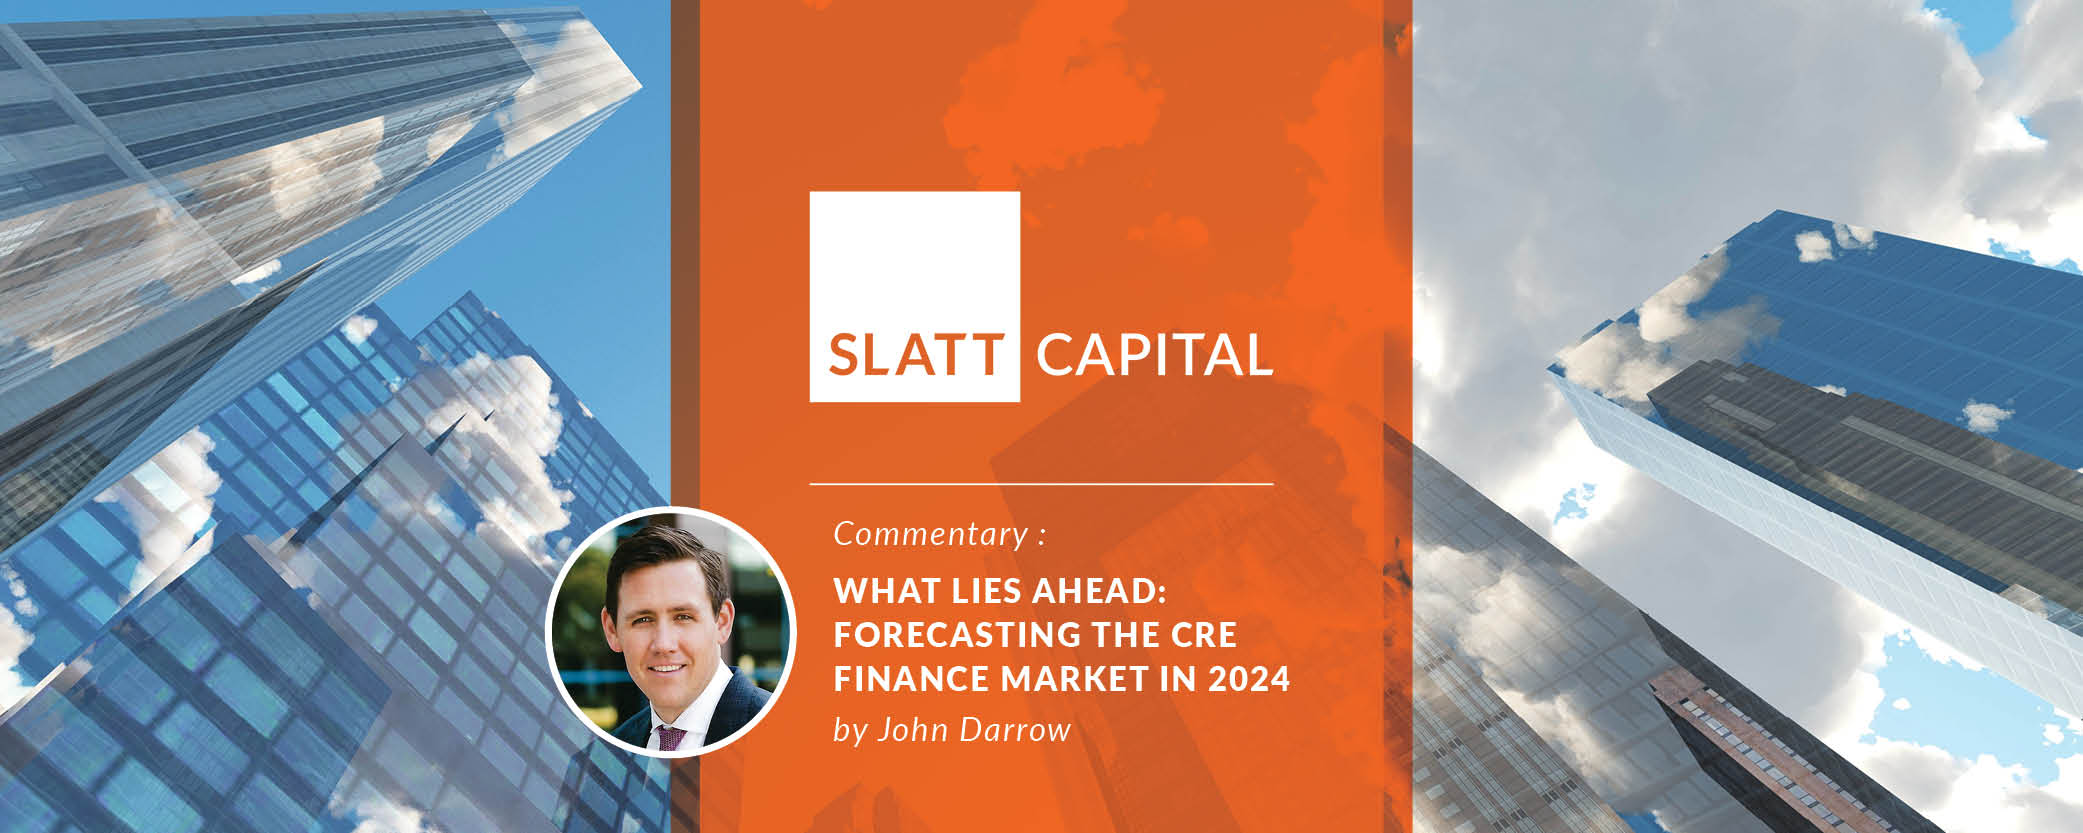 What lies ahead: forecasting the cre finance market in 2024 – by john darrow